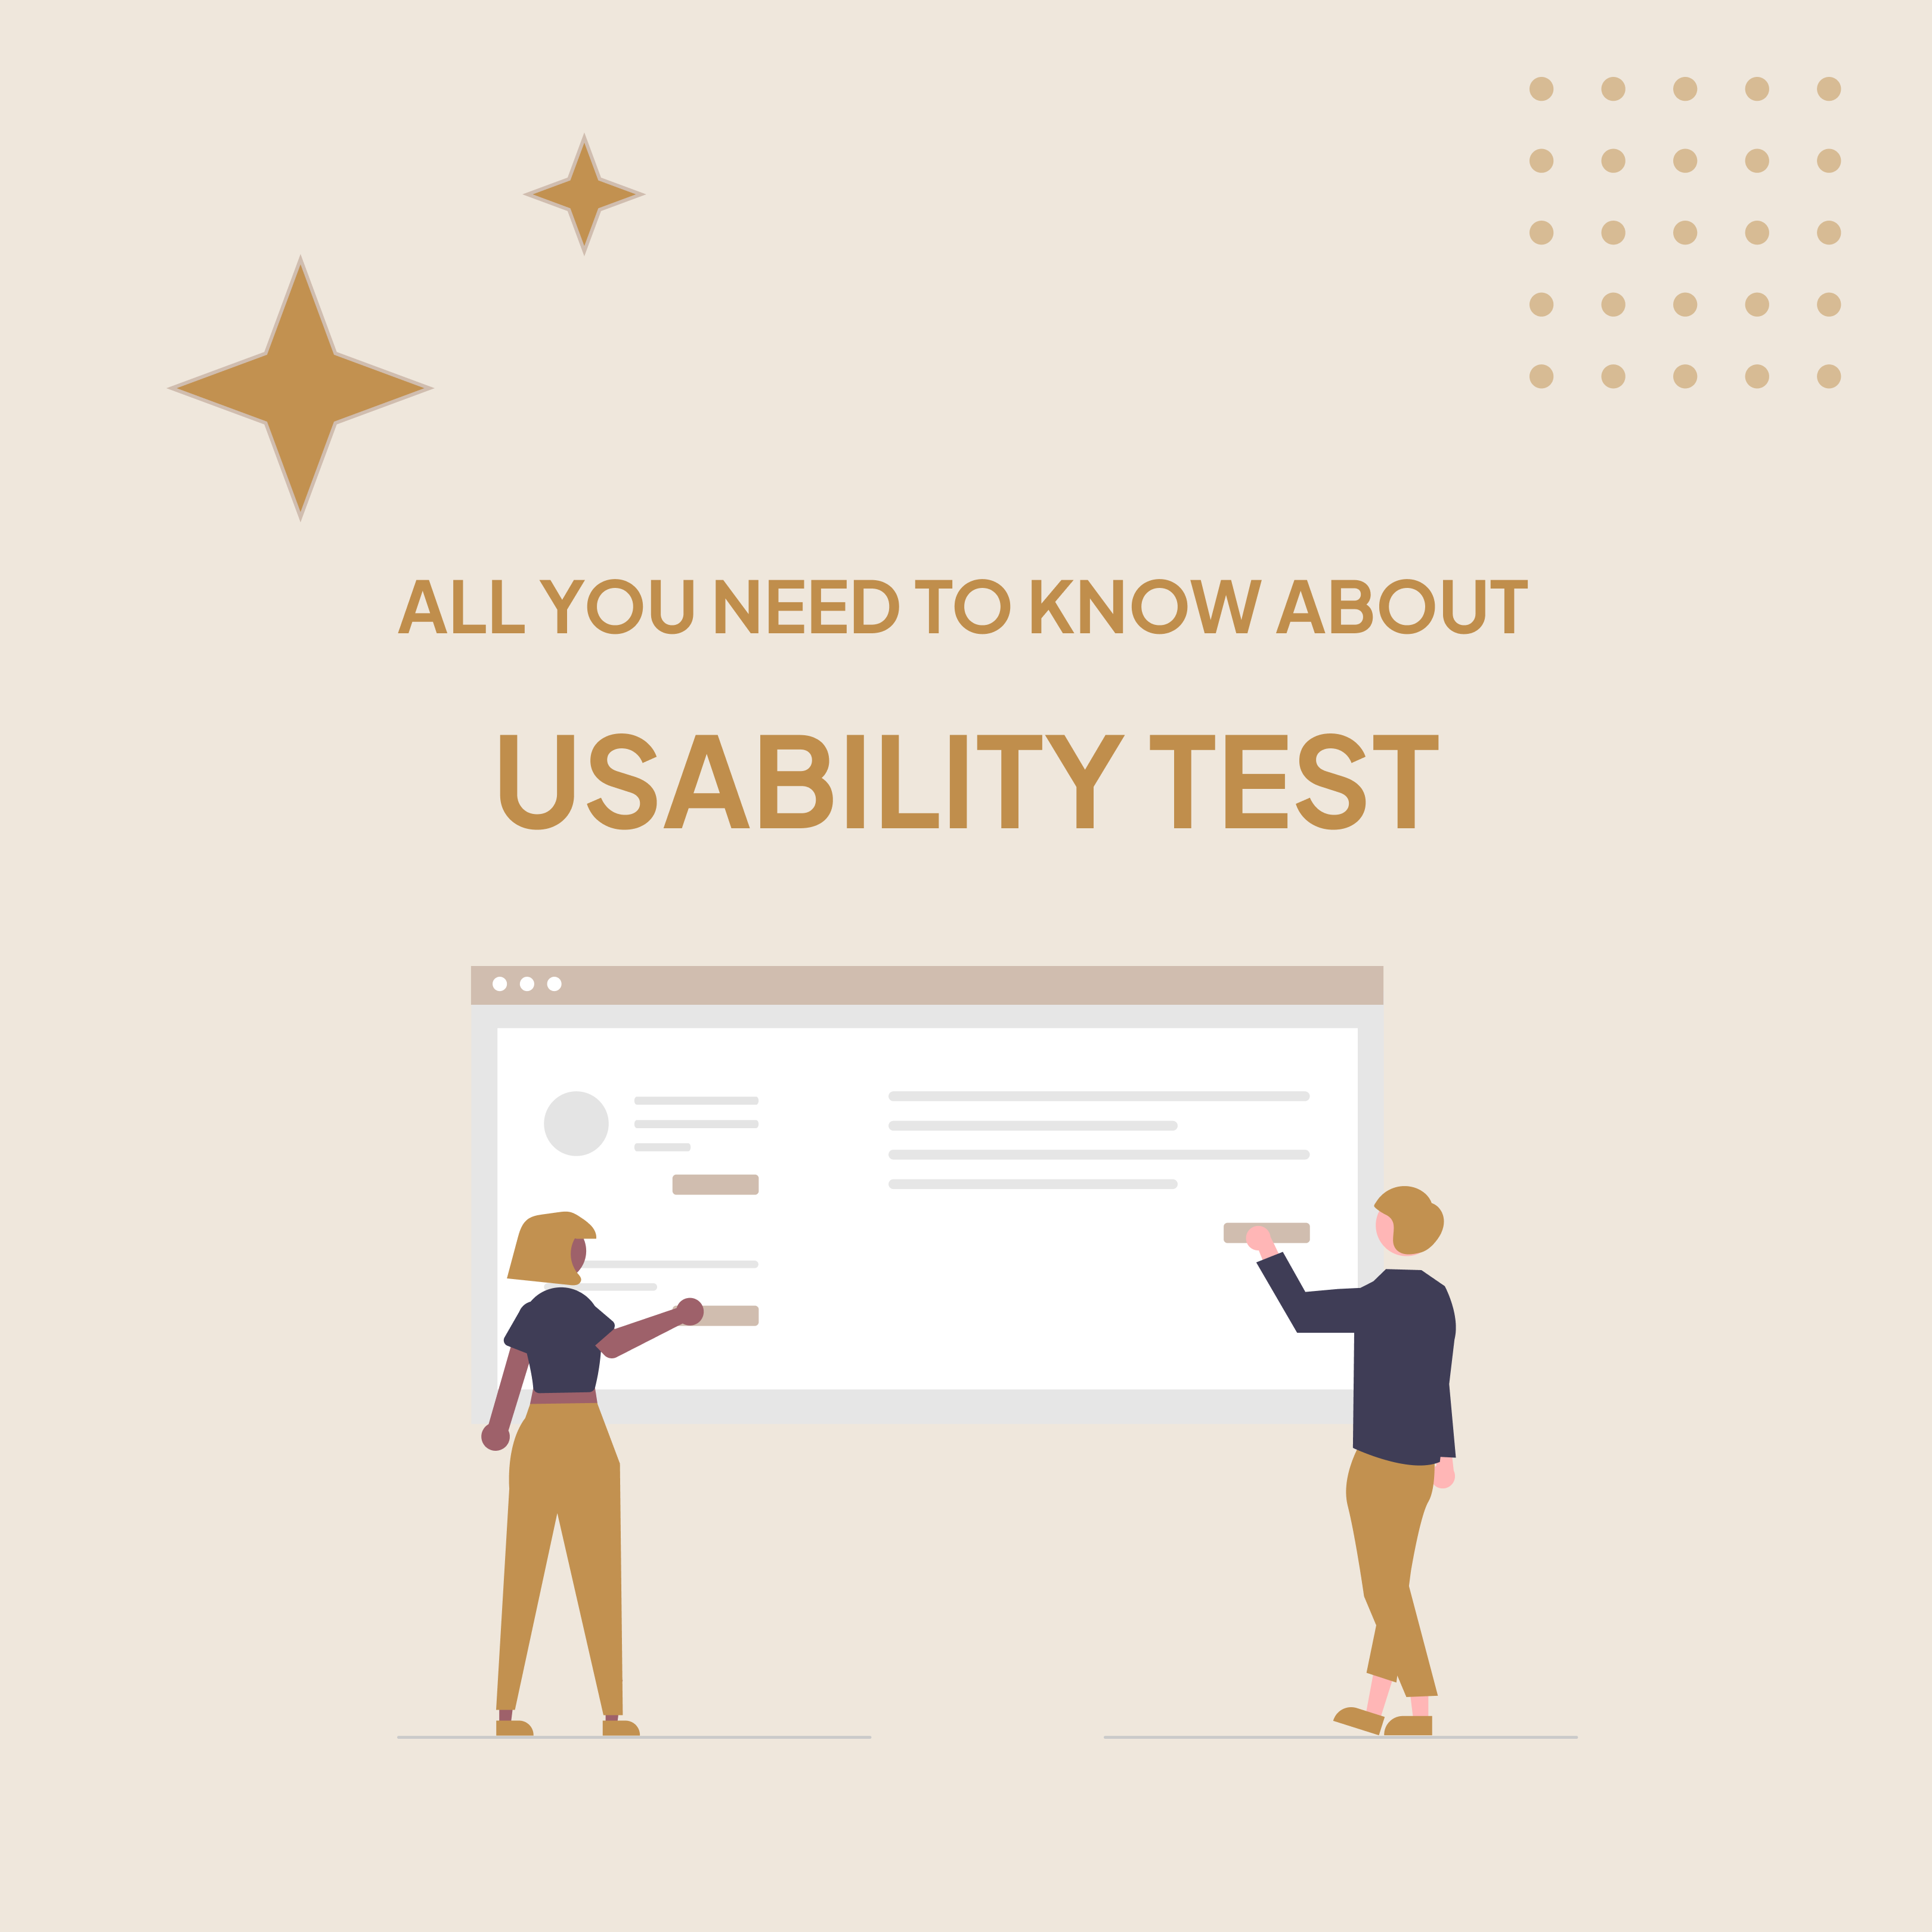 What is Usability Test